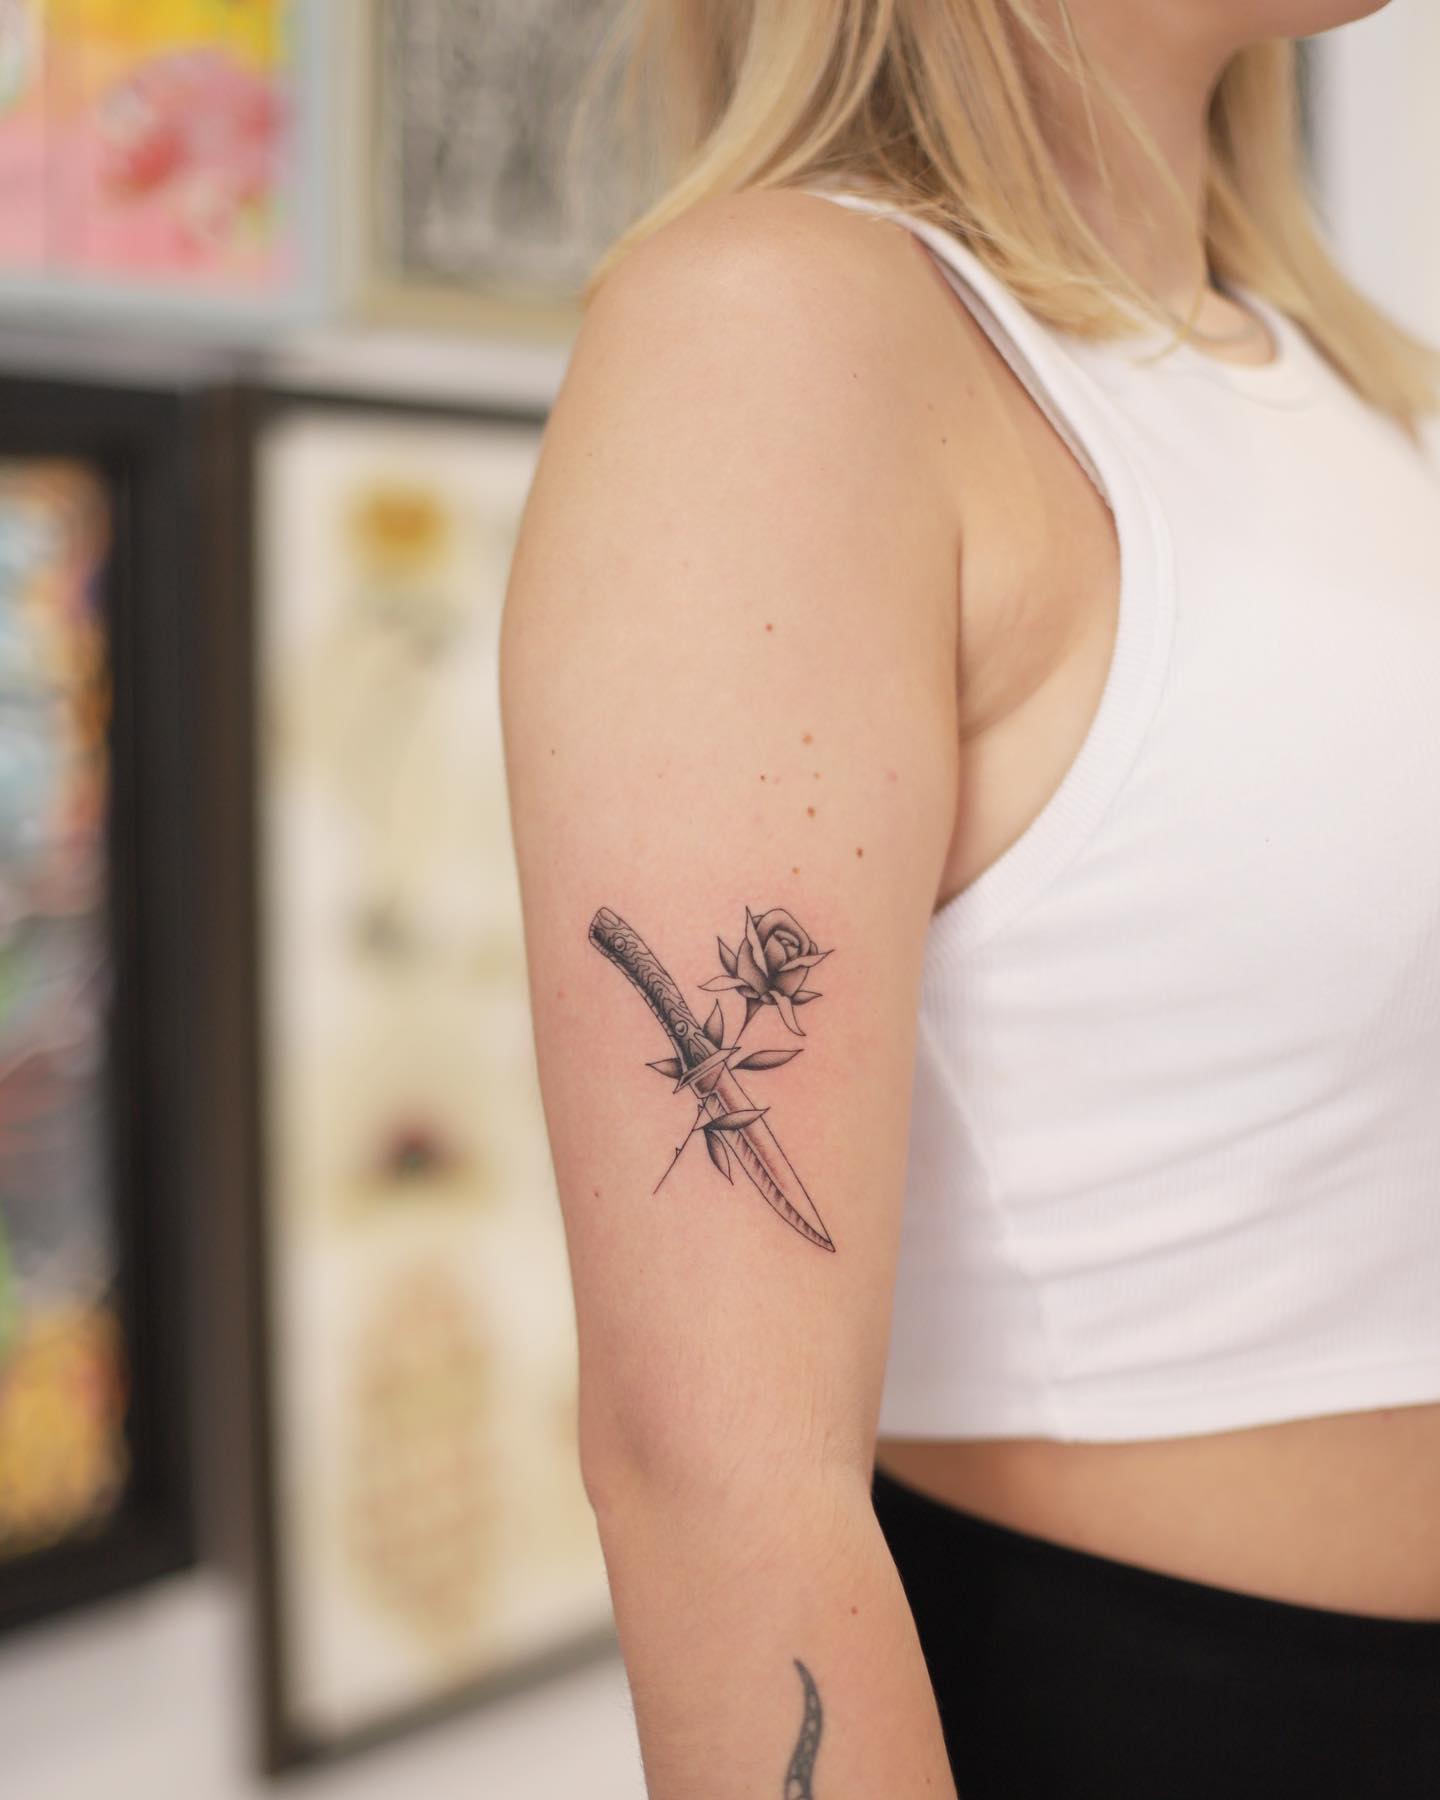 30+ Arm Tattoo Ideas for Women: Best Designs with Meaning - 100 Tattoos